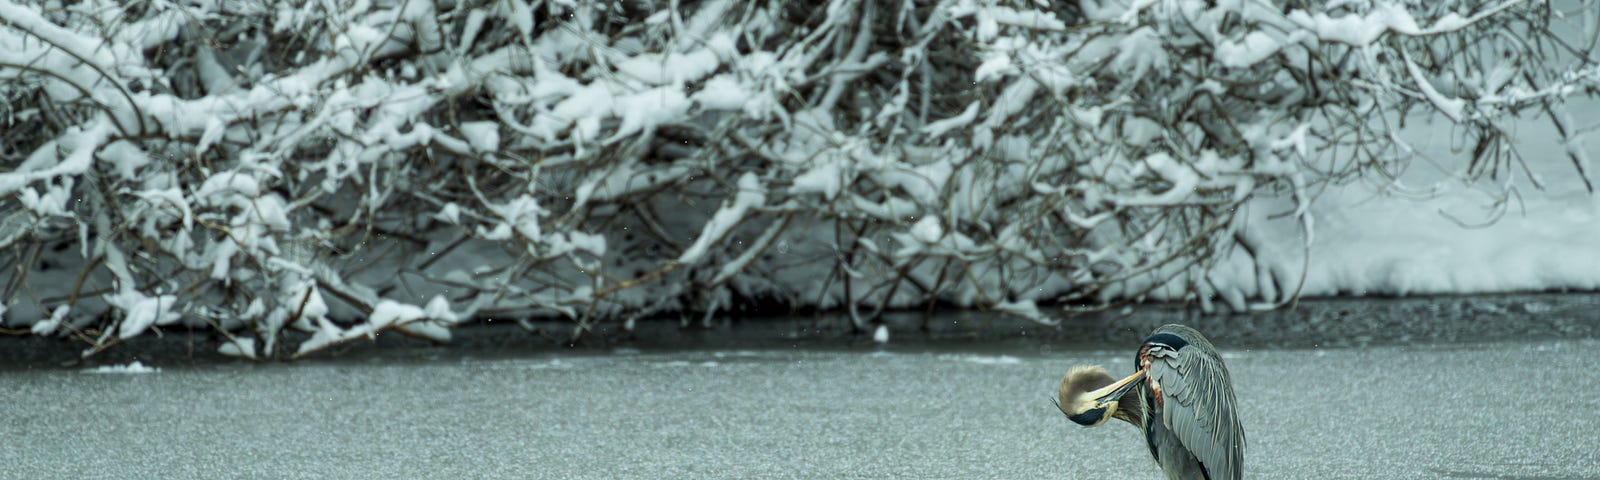 Against a backdrop of snow-covered trees and floating ice, a heron preens itself in the Boise River.